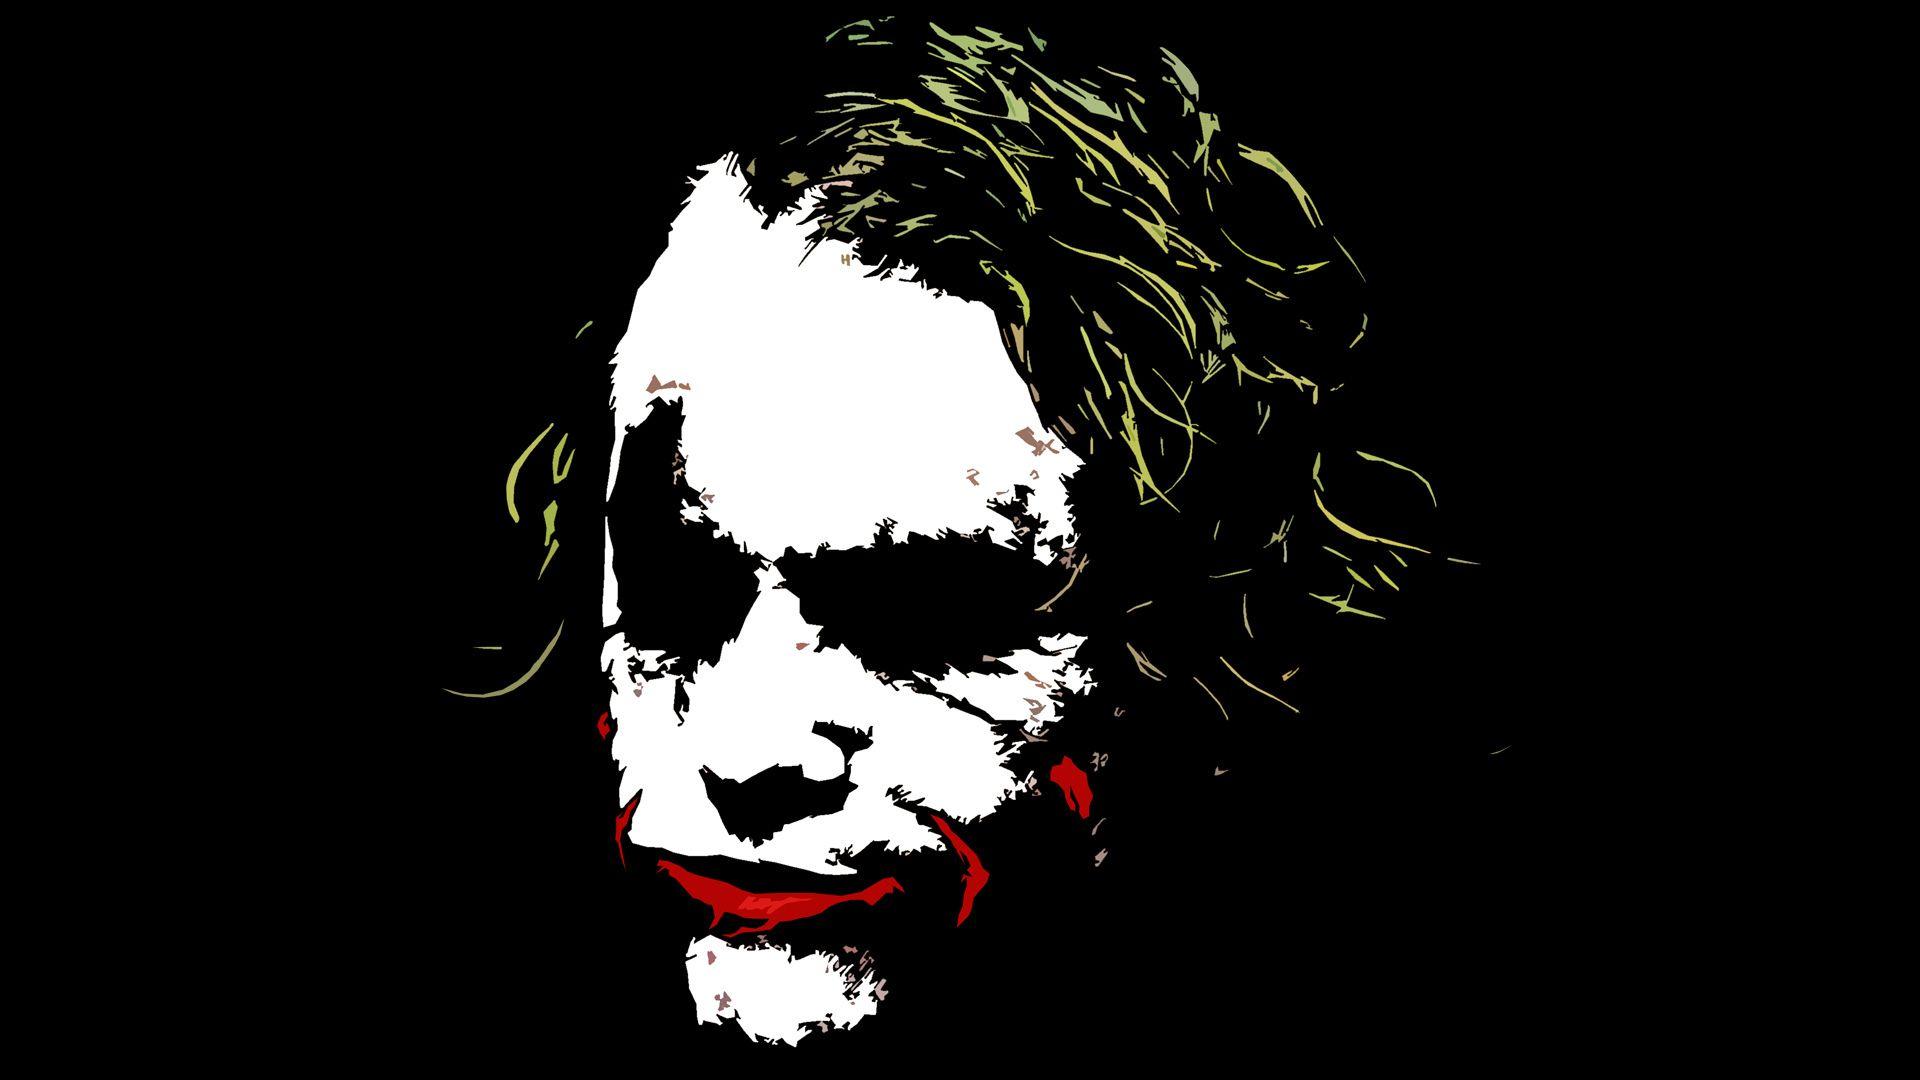 Joker face wallpaper and image, picture, photo